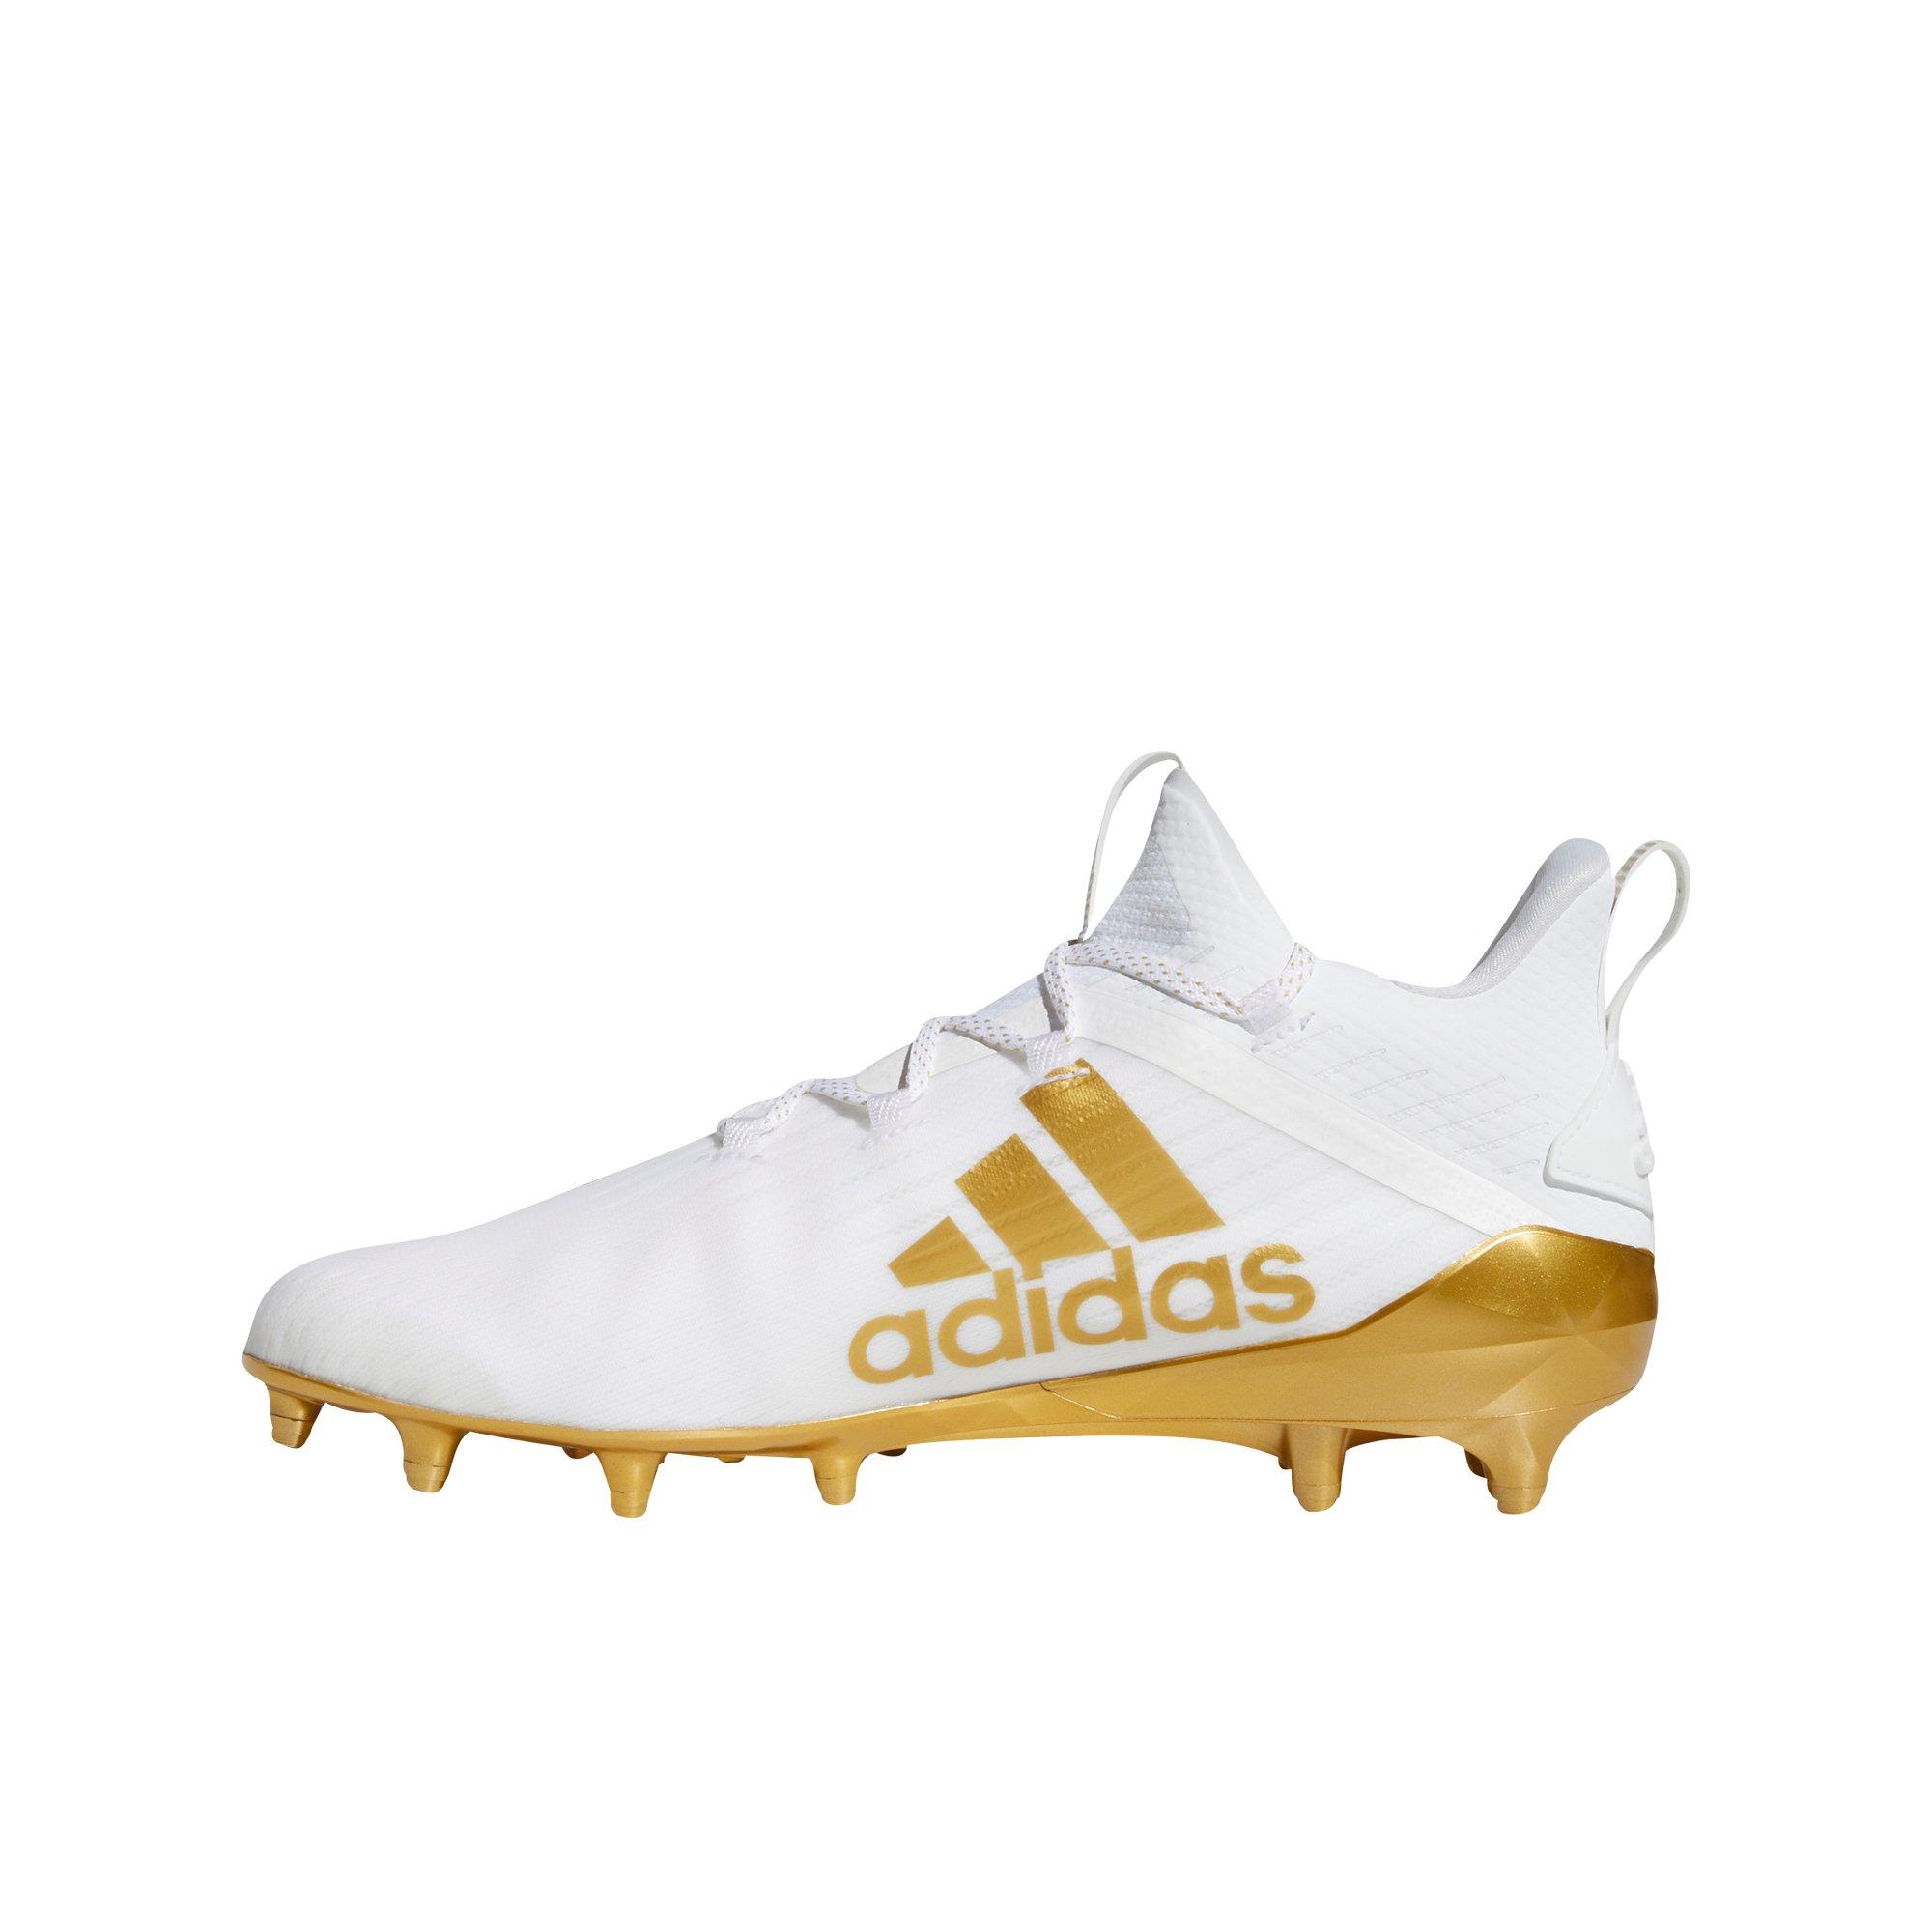 white and gold adidas soccer cleats